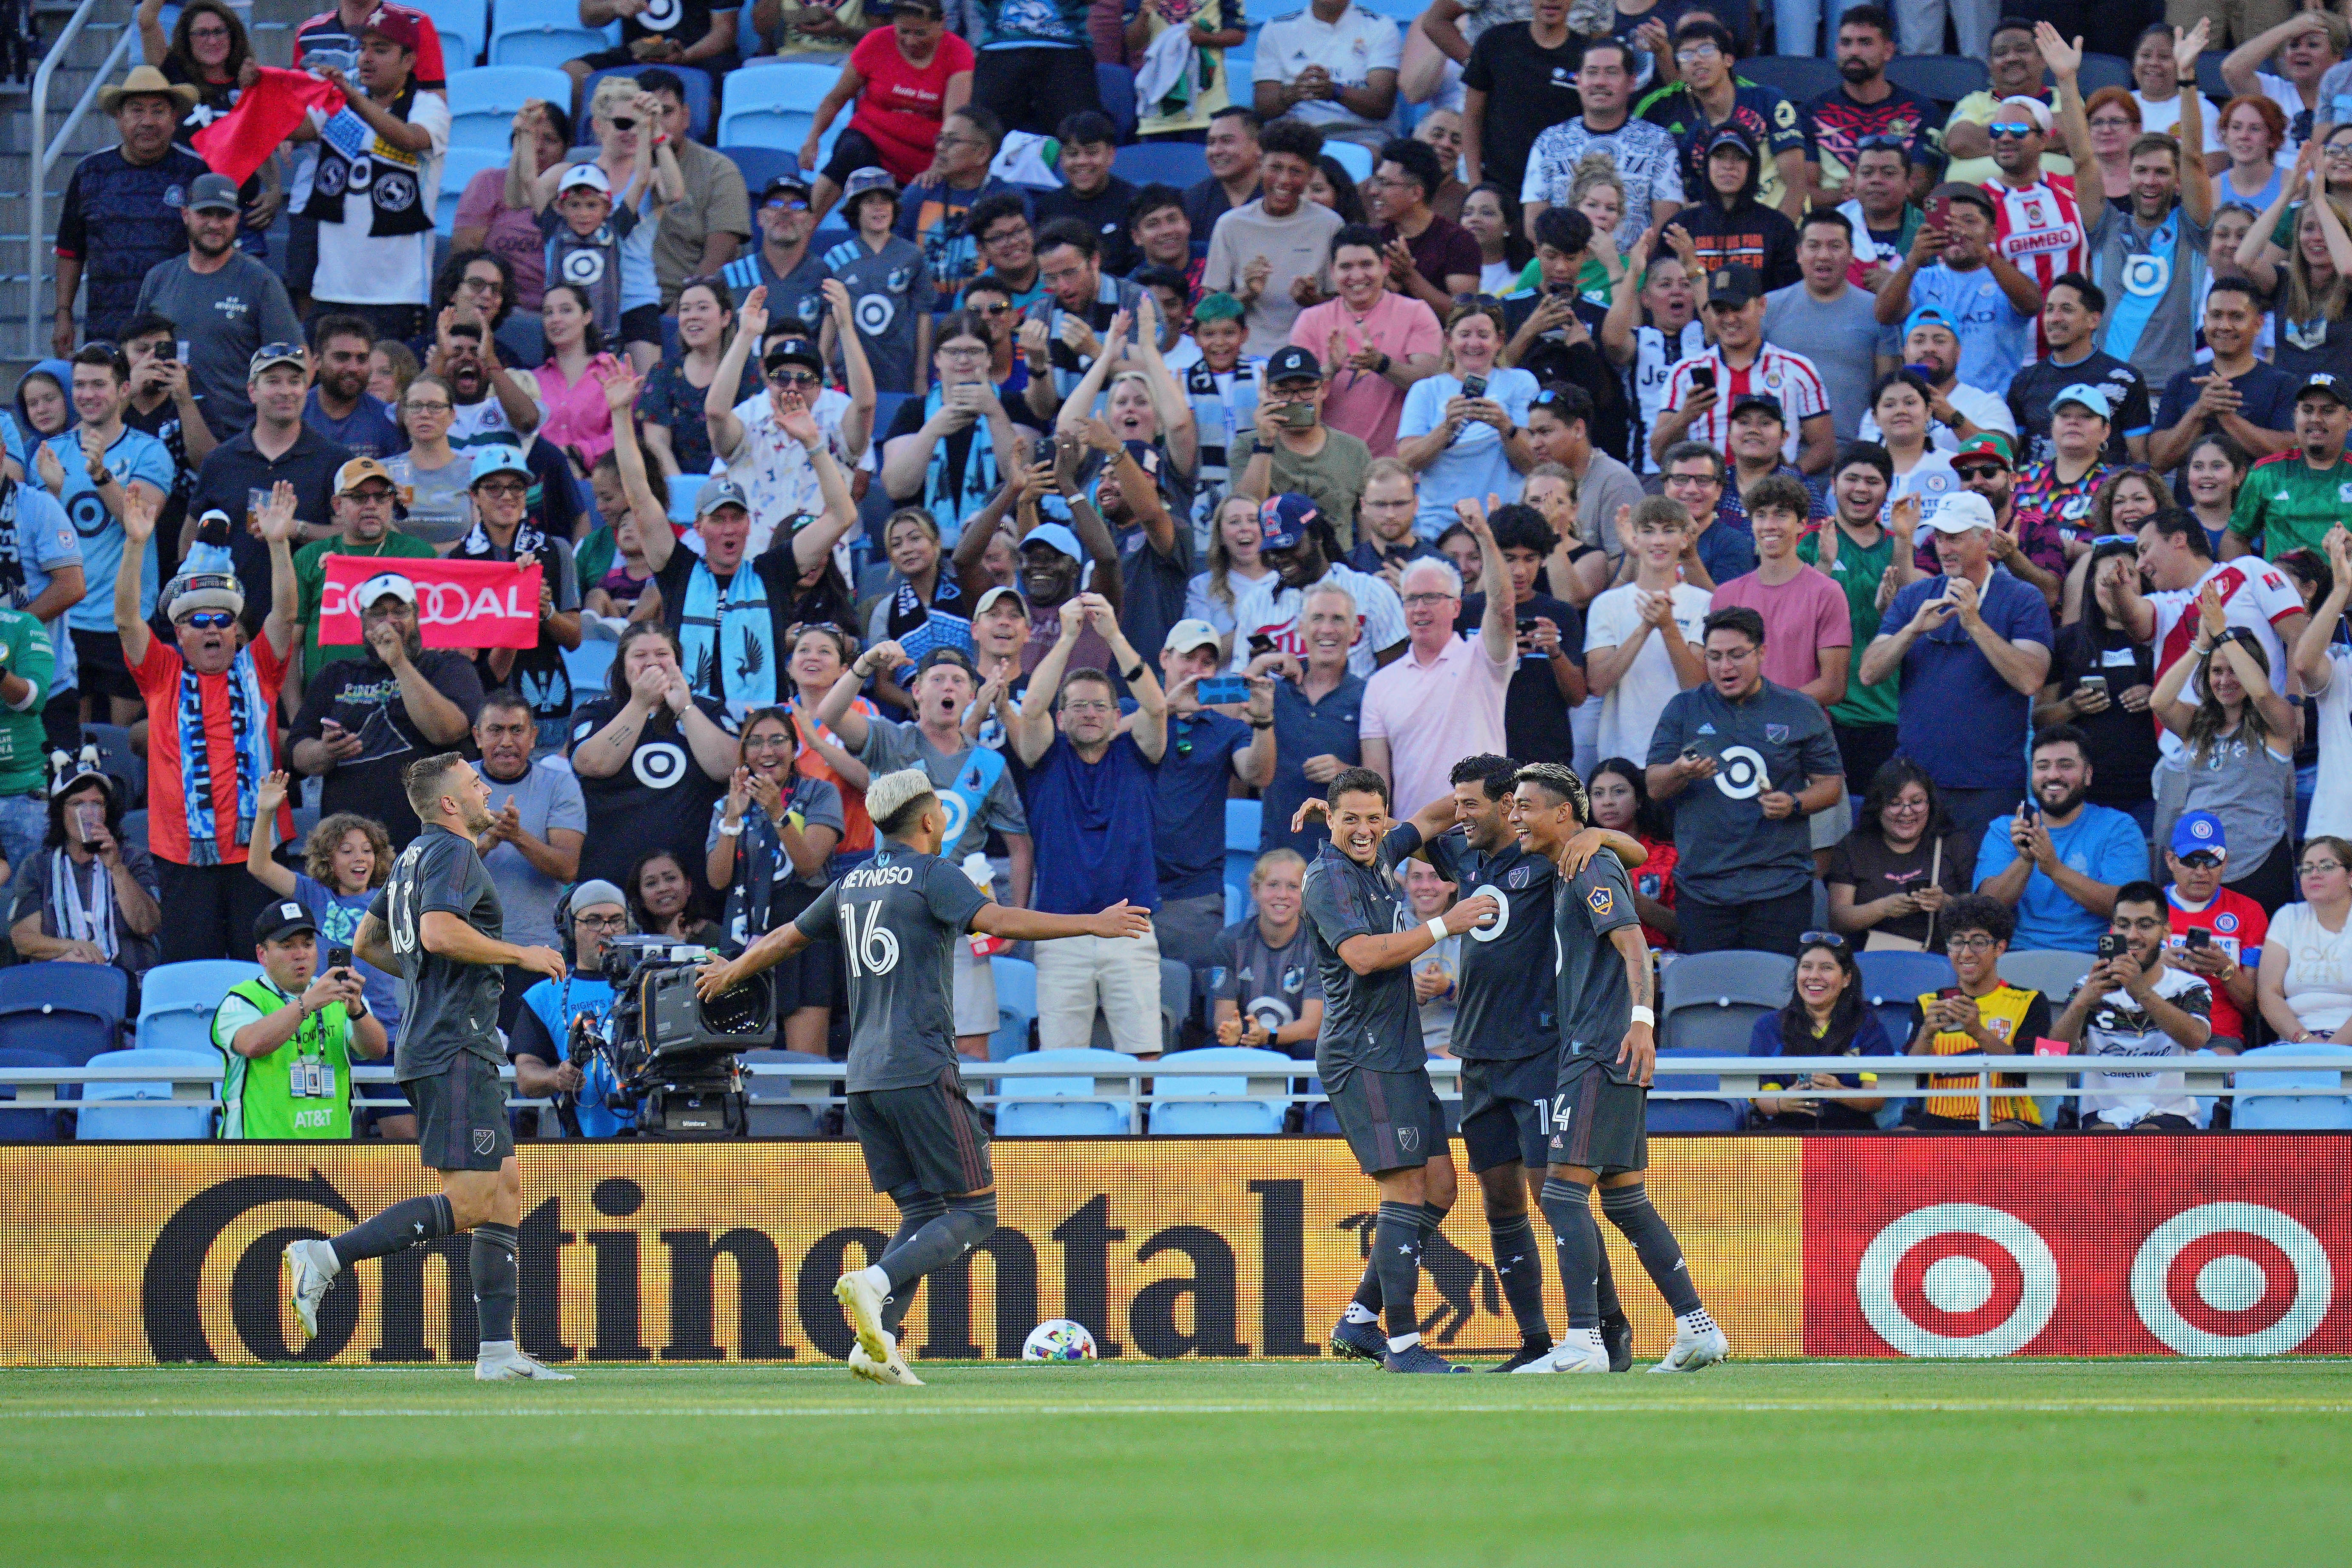 August 10, 2022;  St. Paul, Minnesota, USA;  MLS players celebrate after striker Carlos Vela (11) of LAFC scored a goal against Liga MX during the first half of the 2022 MLS All-Star Game at Allianz Stadium.  Mandatory credit: Brad Rempel-USA TODAY Sports